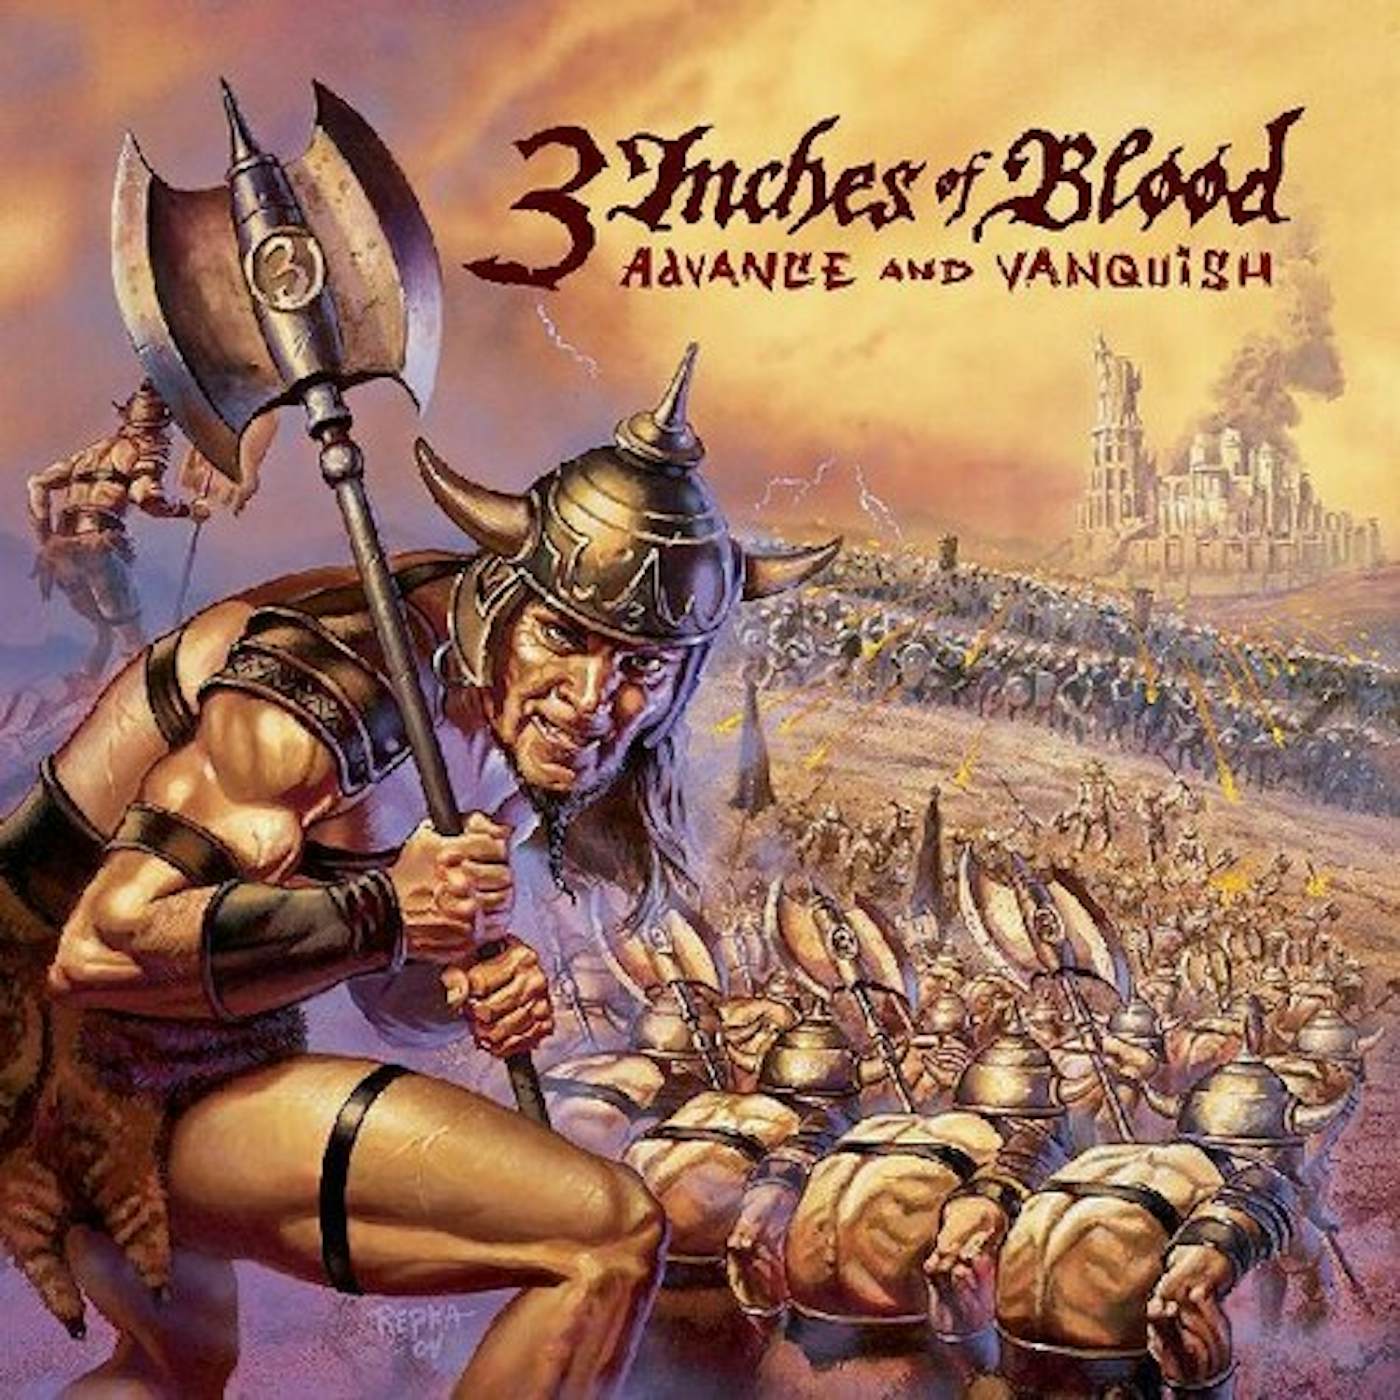 3 Inches Of Blood ADVANCE AND VANQUISH Vinyl Record